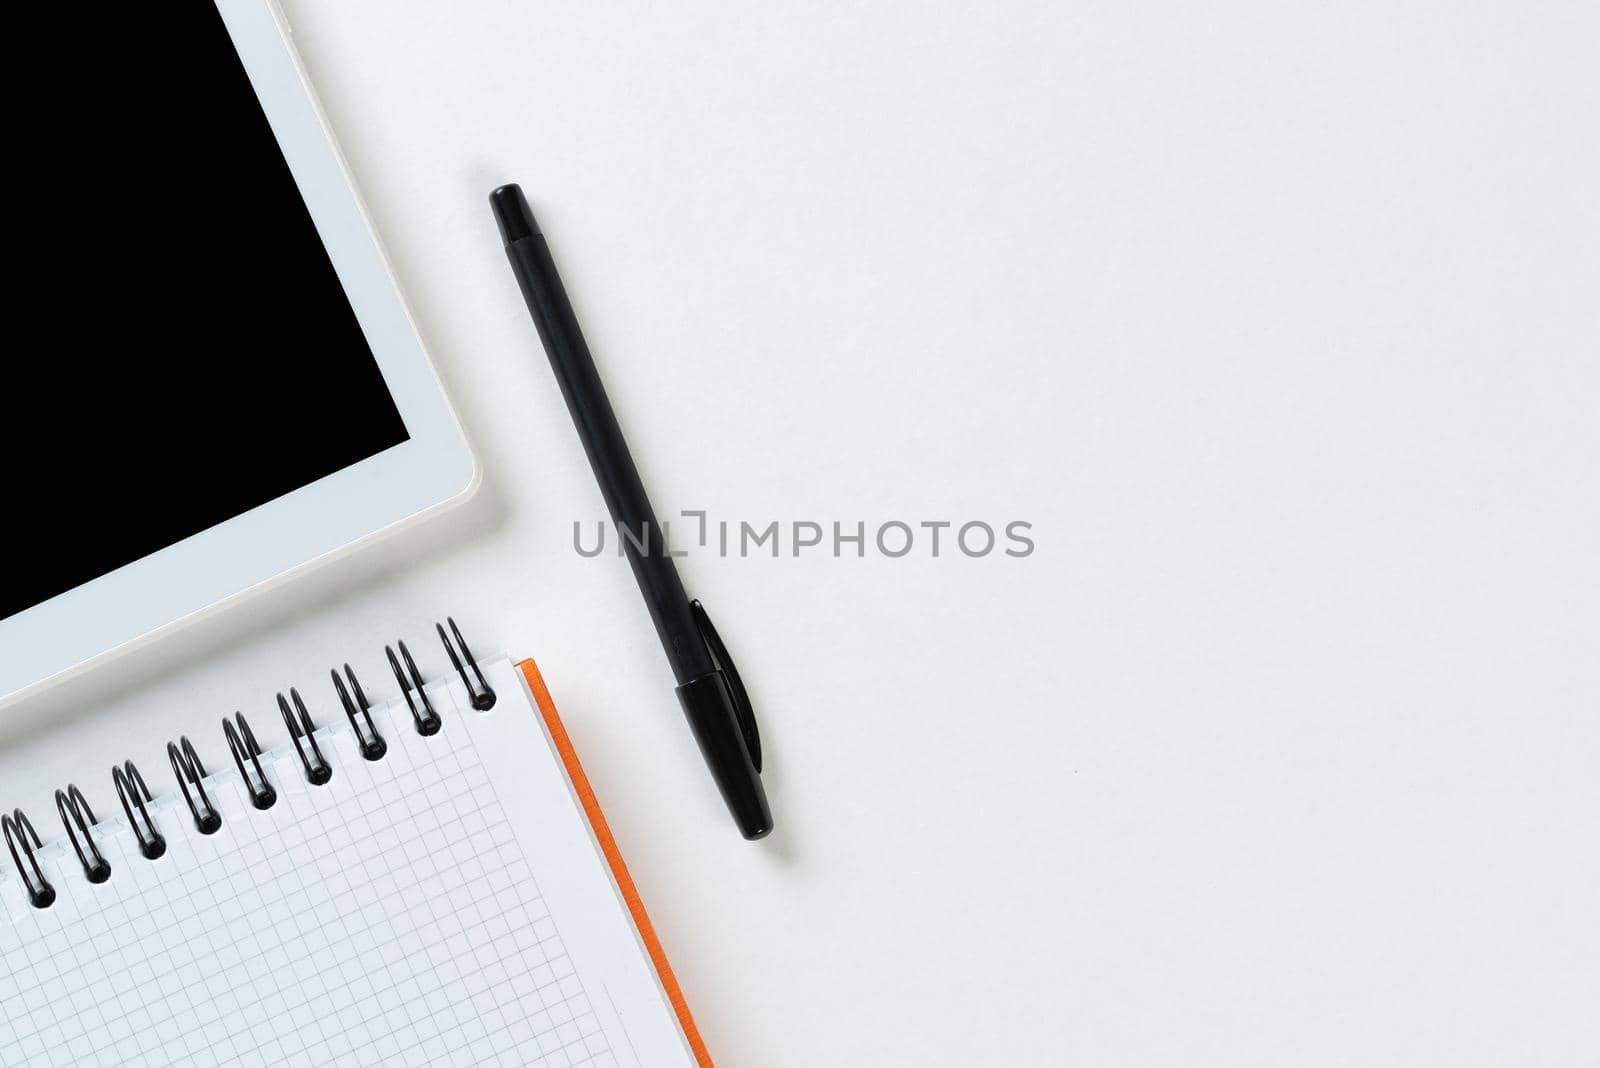 Top view of modern working place. Spiral notepad, pen and tablet computer on white surface. Education, creativity and innovation concept with copy space. Digital technology in modern business.